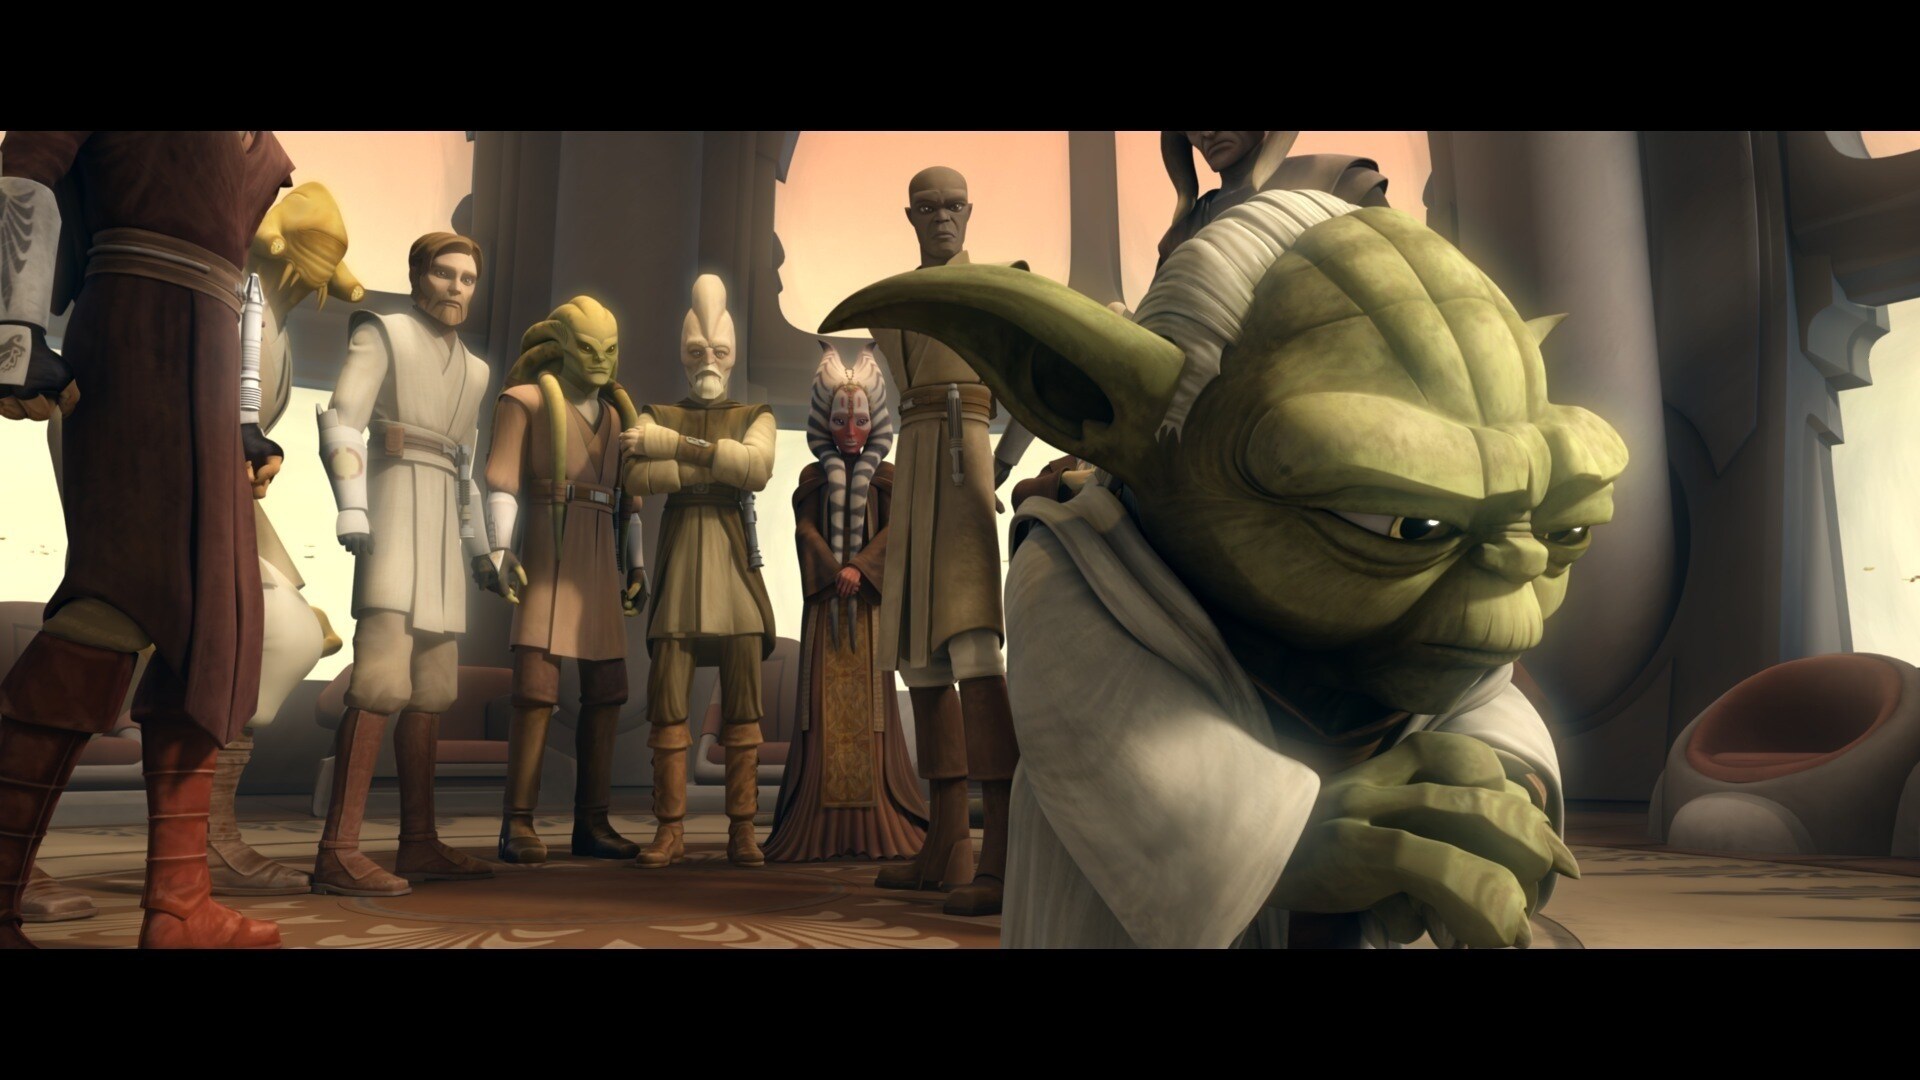 After further meditation, Yoda addresses the Jedi Council. The old Master is shaken in his belief...